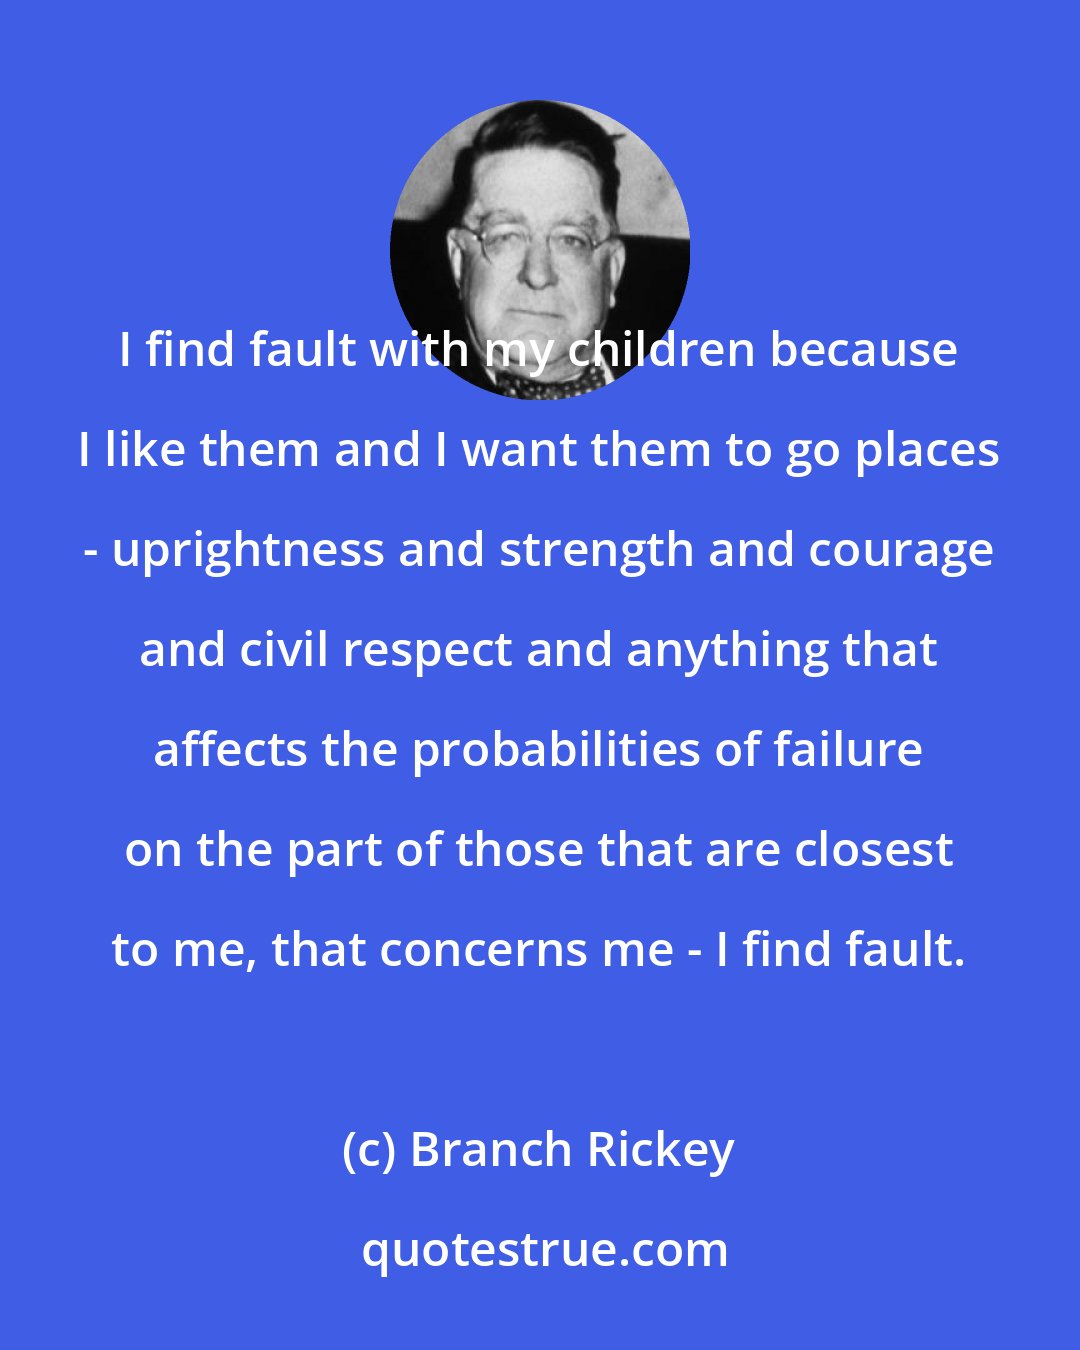 Branch Rickey: I find fault with my children because I like them and I want them to go places - uprightness and strength and courage and civil respect and anything that affects the probabilities of failure on the part of those that are closest to me, that concerns me - I find fault.